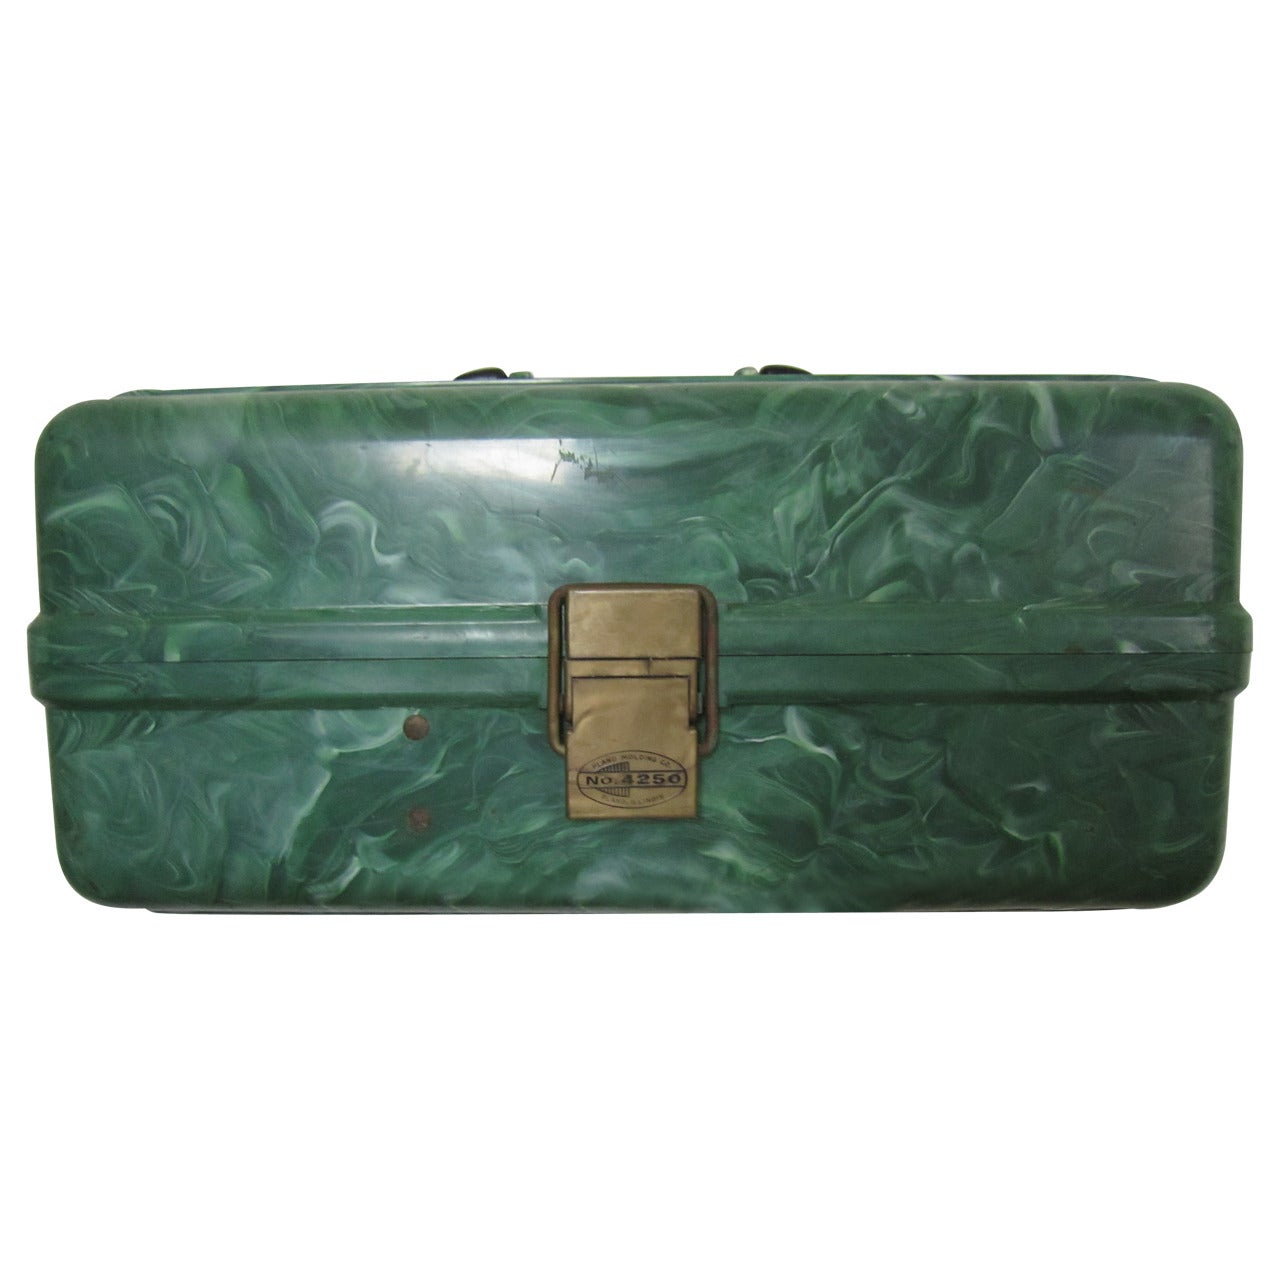 Vintage Green Marbleized or Malachite Style Plastic Tackle or Storage Box